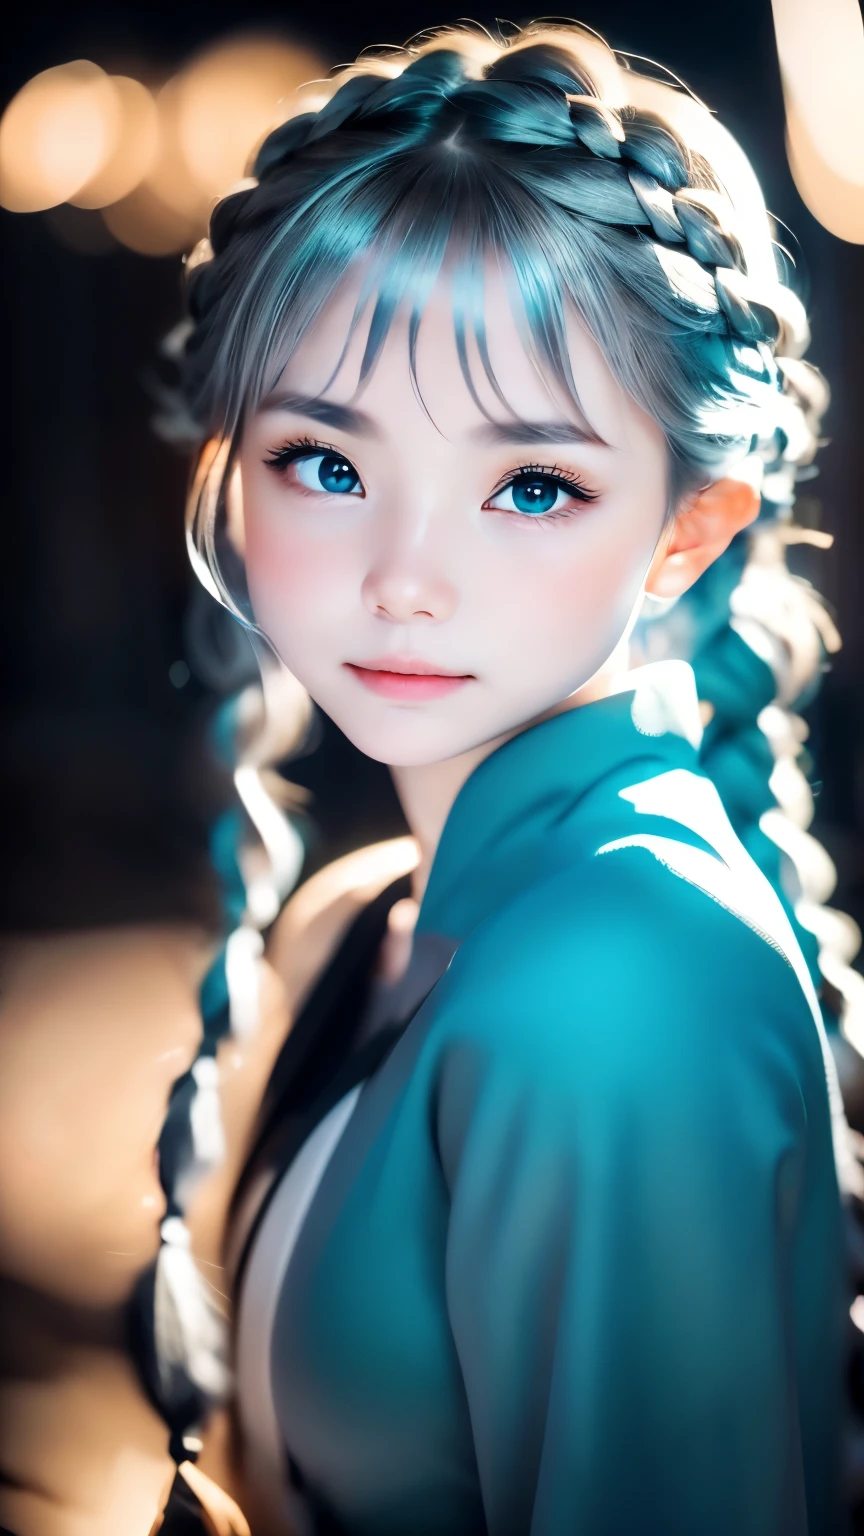 1 girl, white skin、Caucasoid、very cute face、small nose、plump lips、Braids bundled into one、french braid、An ennui look、night, dark, ((ash gray hair)),(Detailed gray eyes)、natural color tunic,National costume, Upper body,Perfect good looks, ((blurred background))、((black background)),((shining turquoise light))、,cinematic lighting,professional photographer,random pose、50ｍｍlens